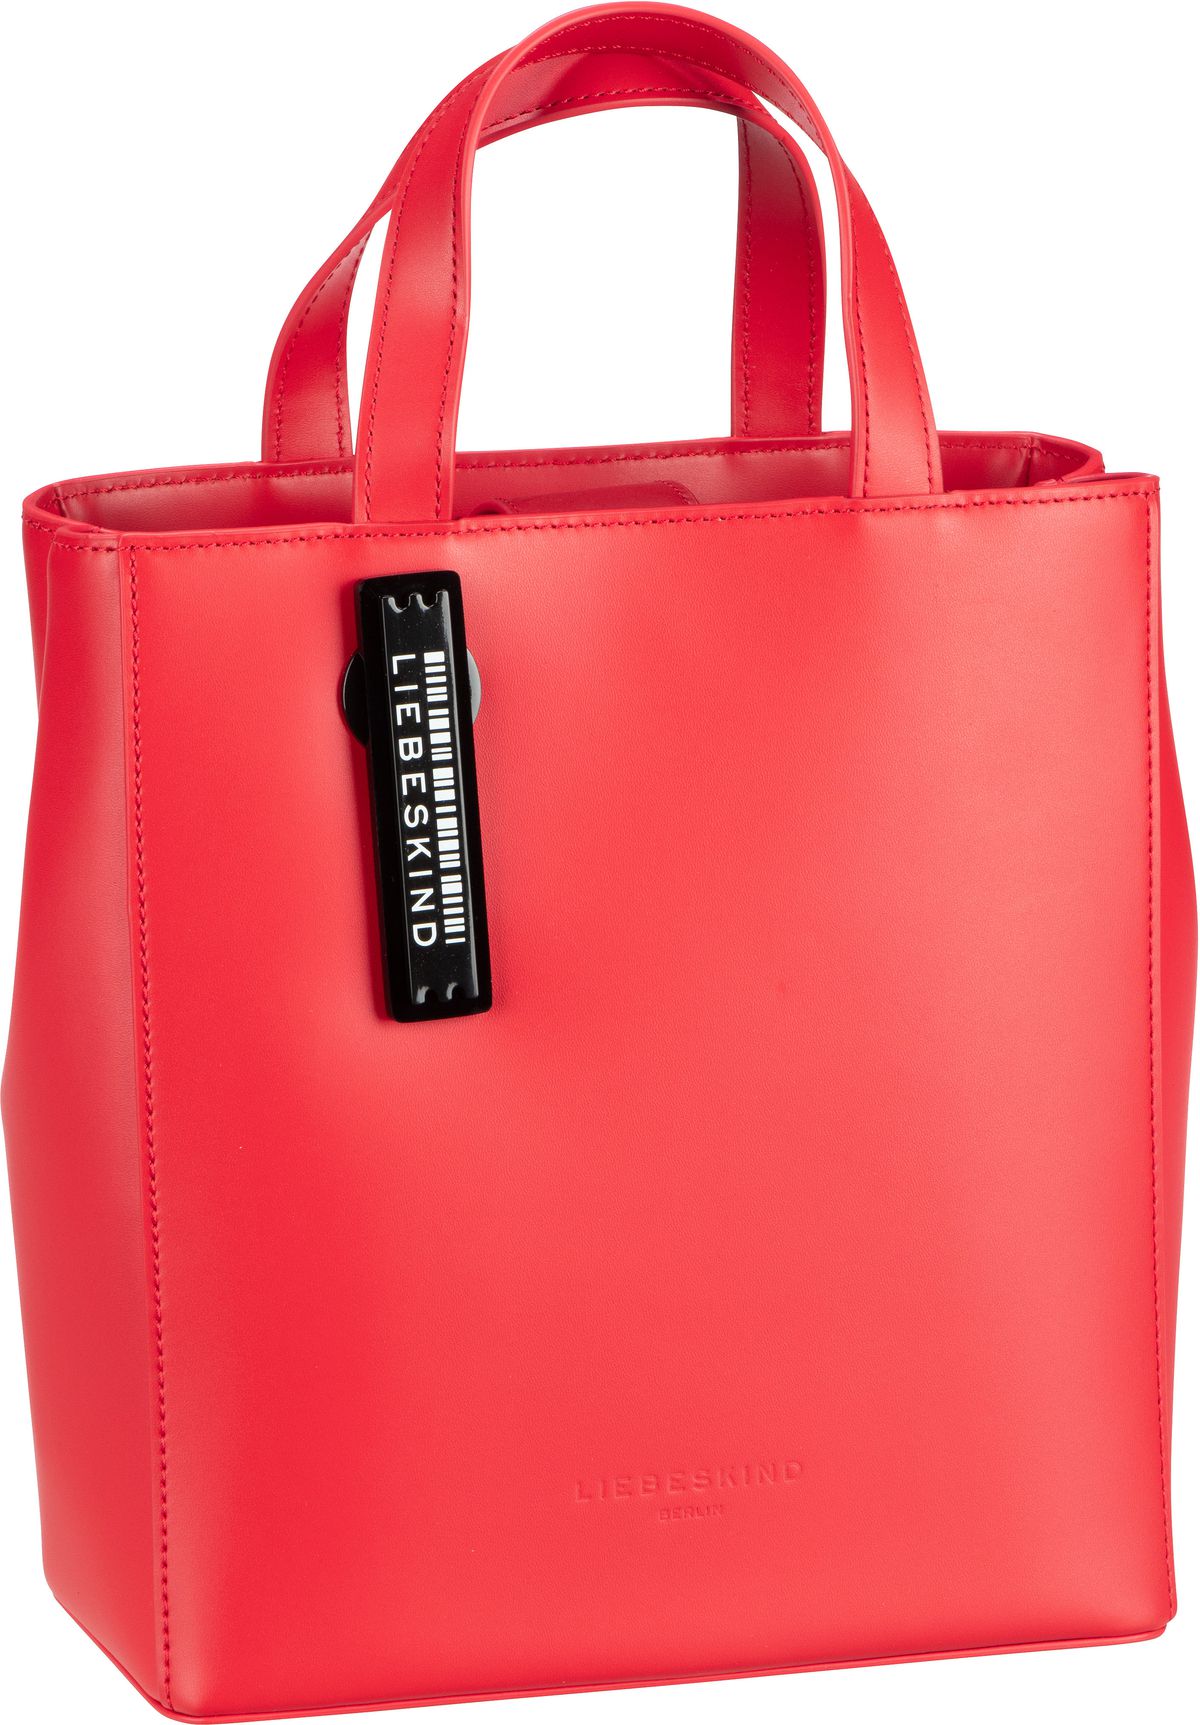 Liebeskind Berlin Paper Bag Tote S - Passion